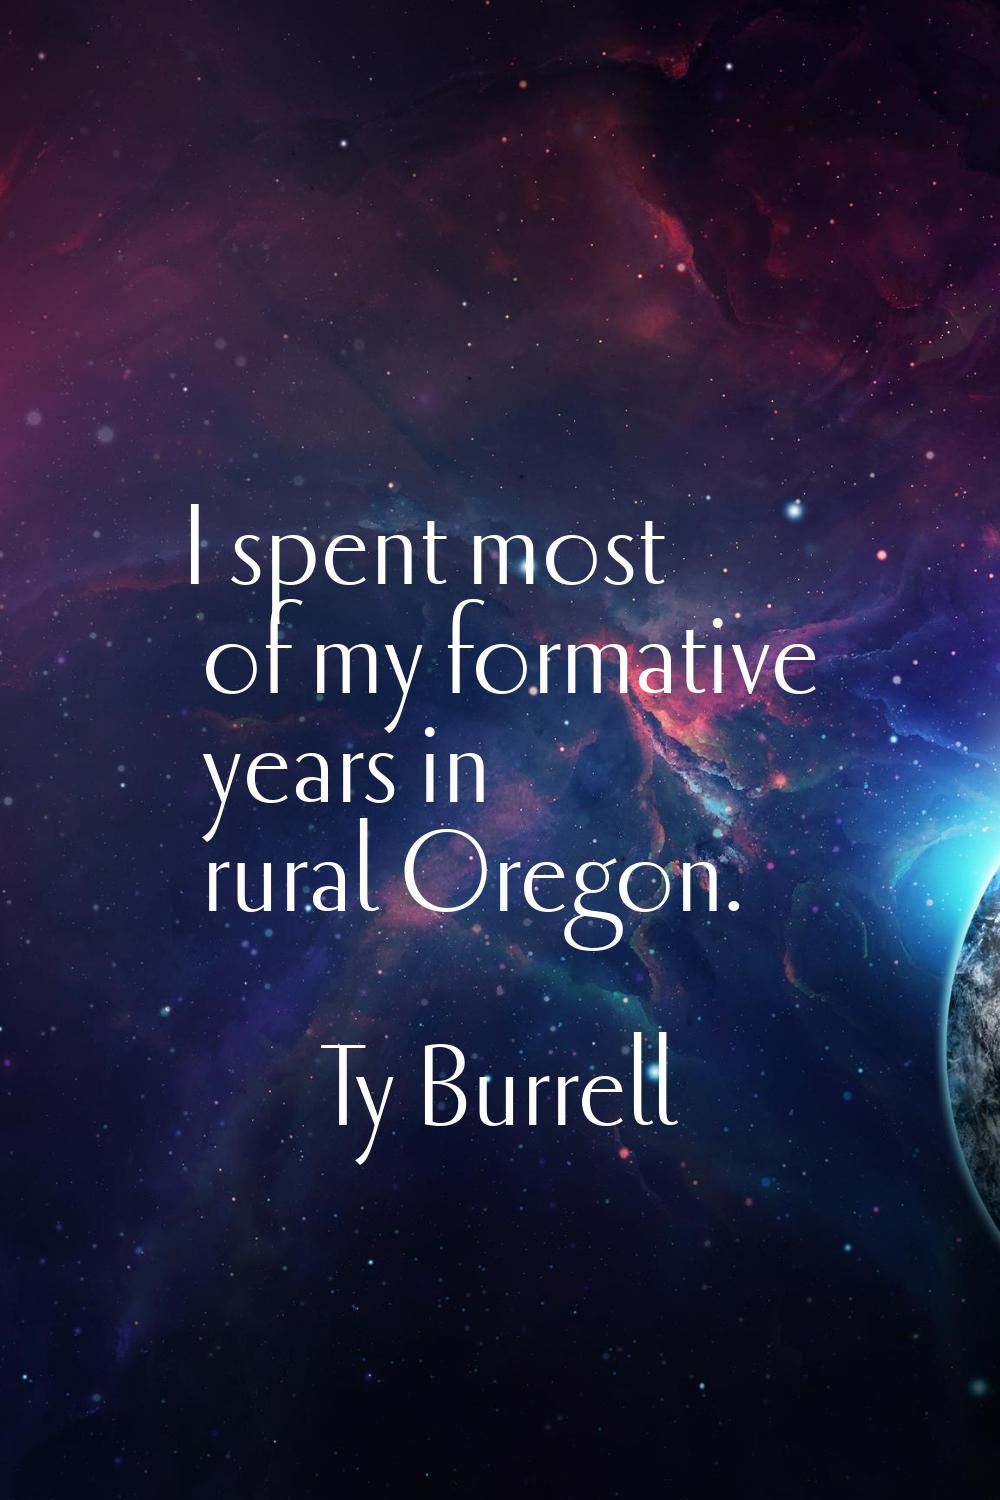 I spent most of my formative years in rural Oregon.